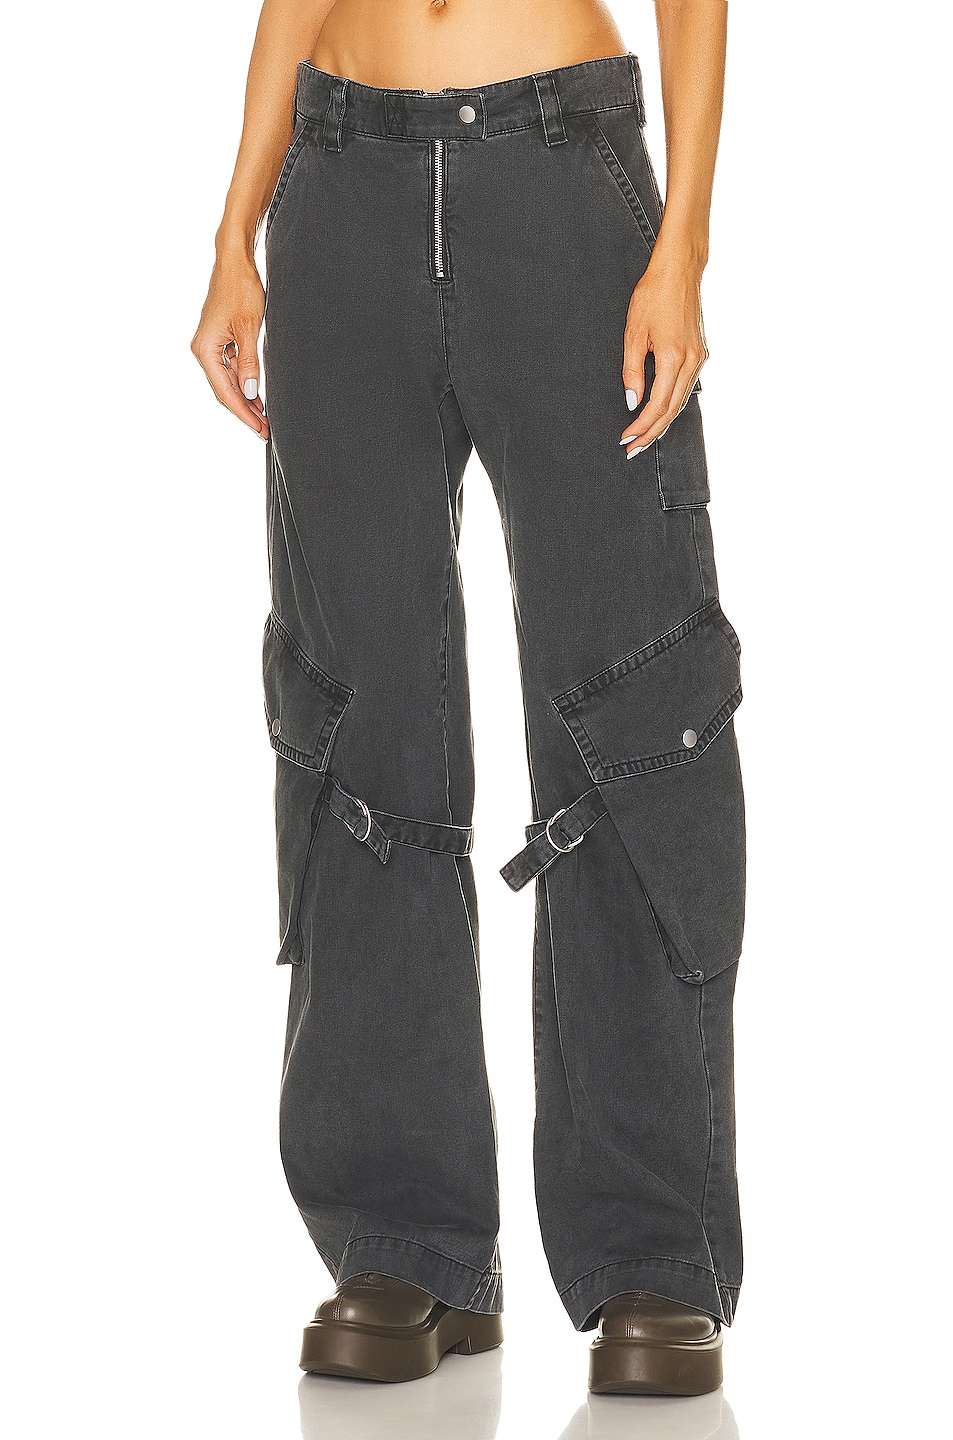 Acne Studios Cotton Pant in Washed Black | FWRD